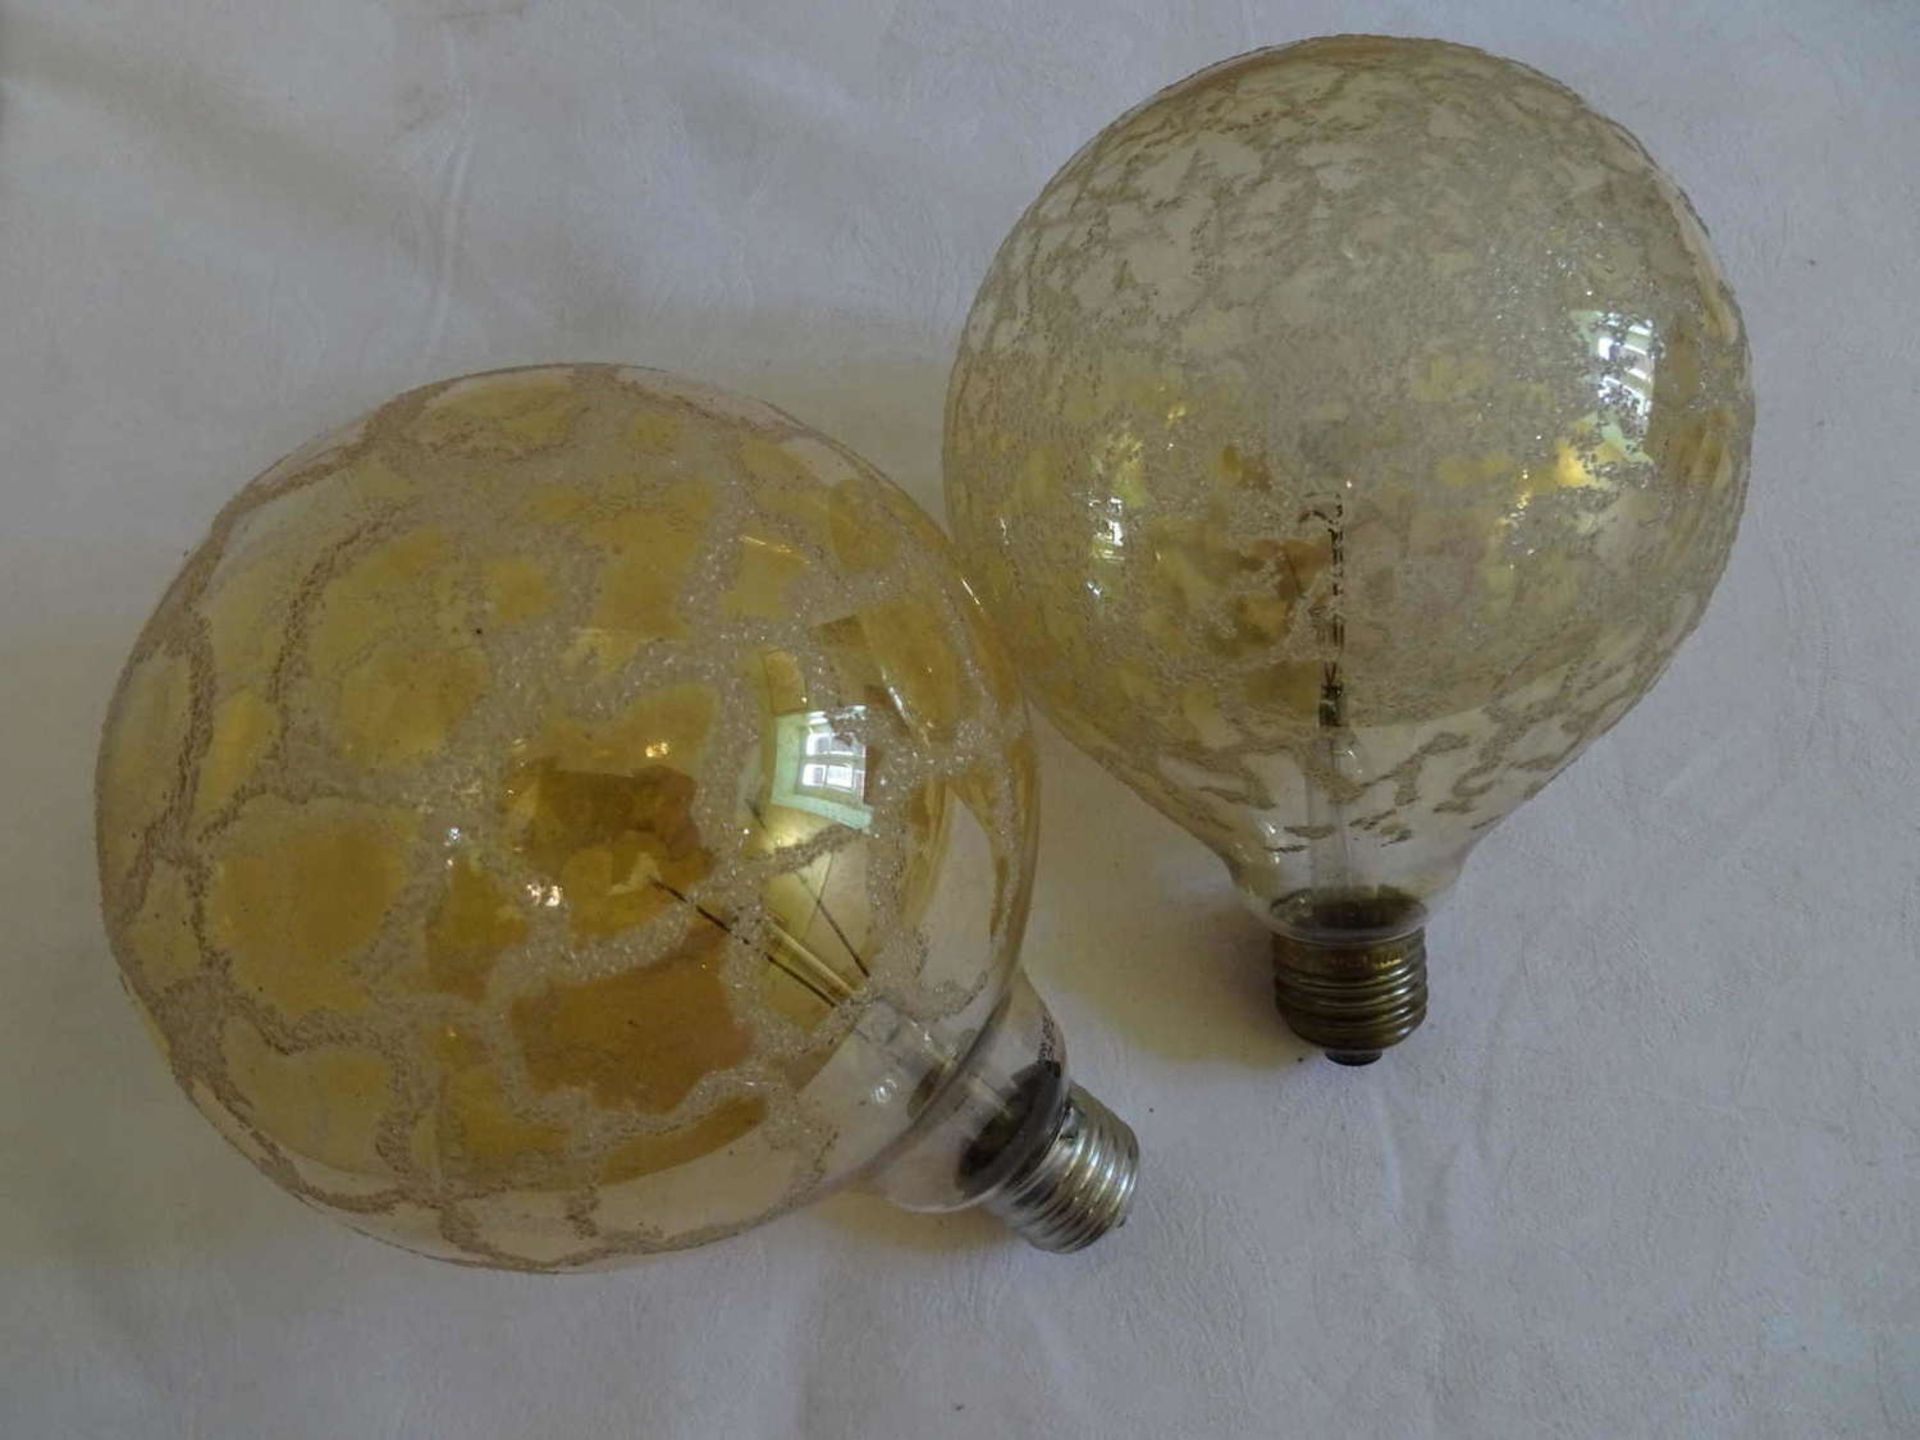 8-beam brass ceiling lamp, approx. 50s / 60s with large incandescent lamps. Please visit! - Image 2 of 2